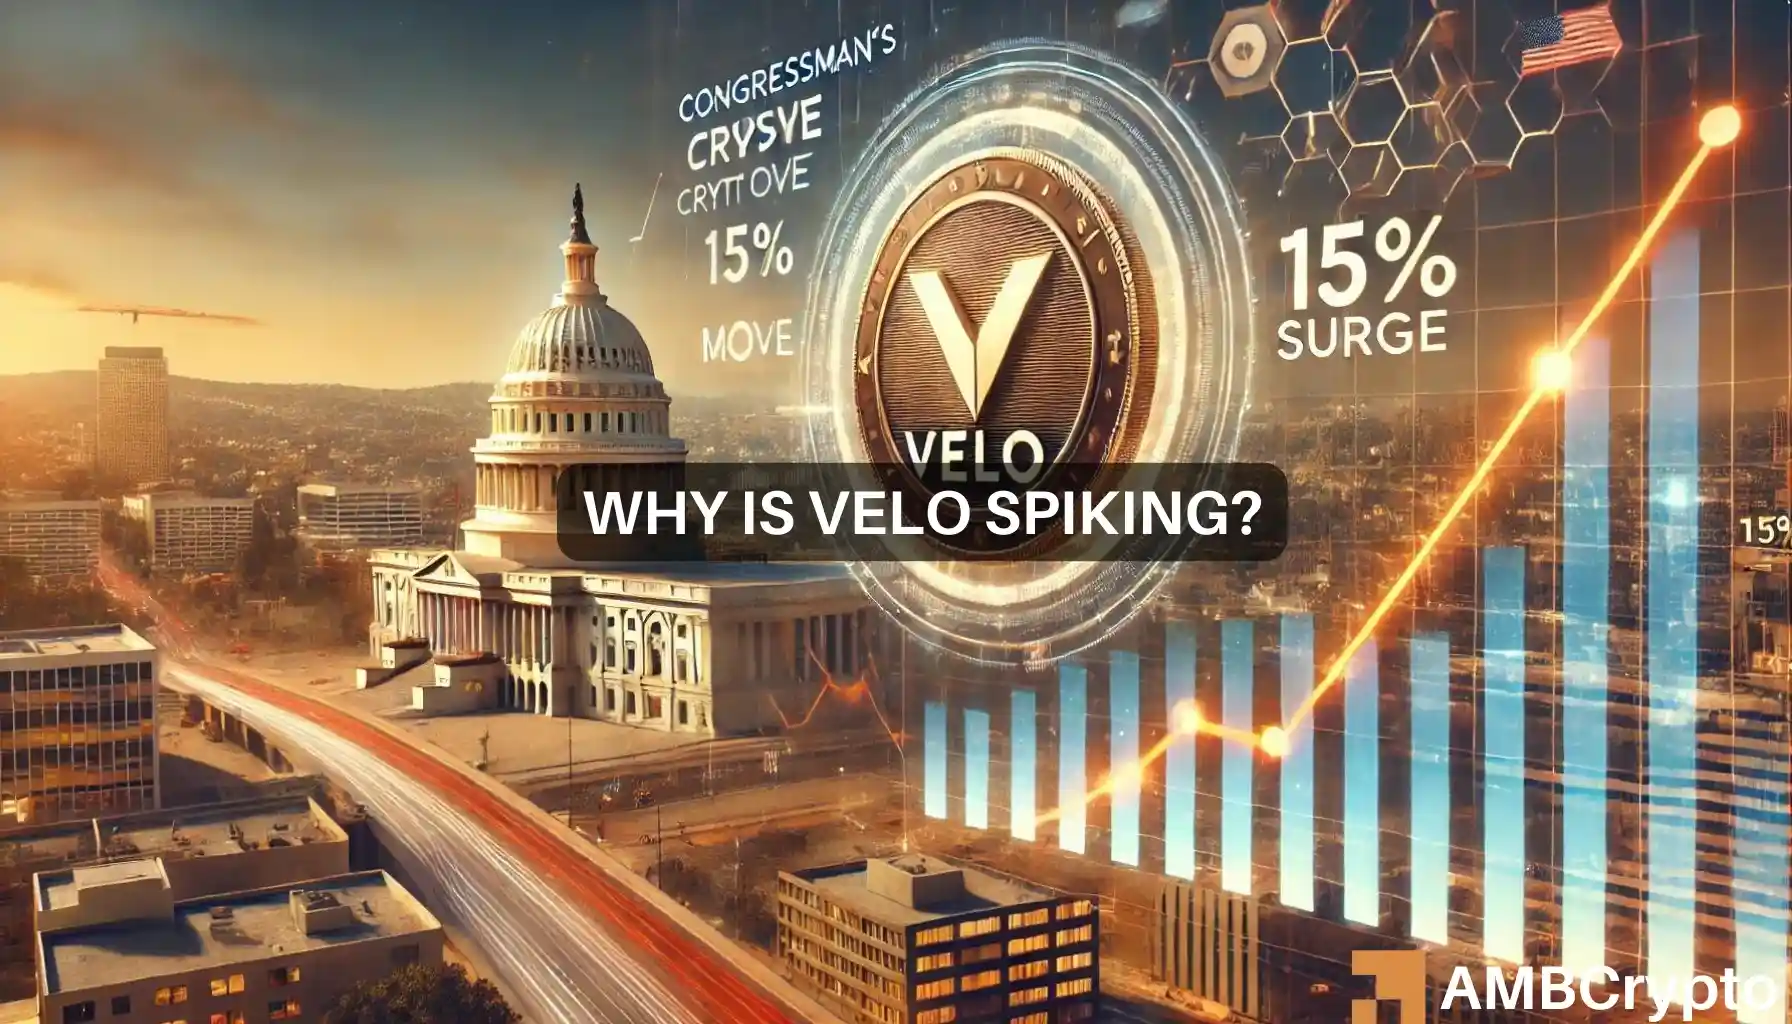 Why is VELO spiking?